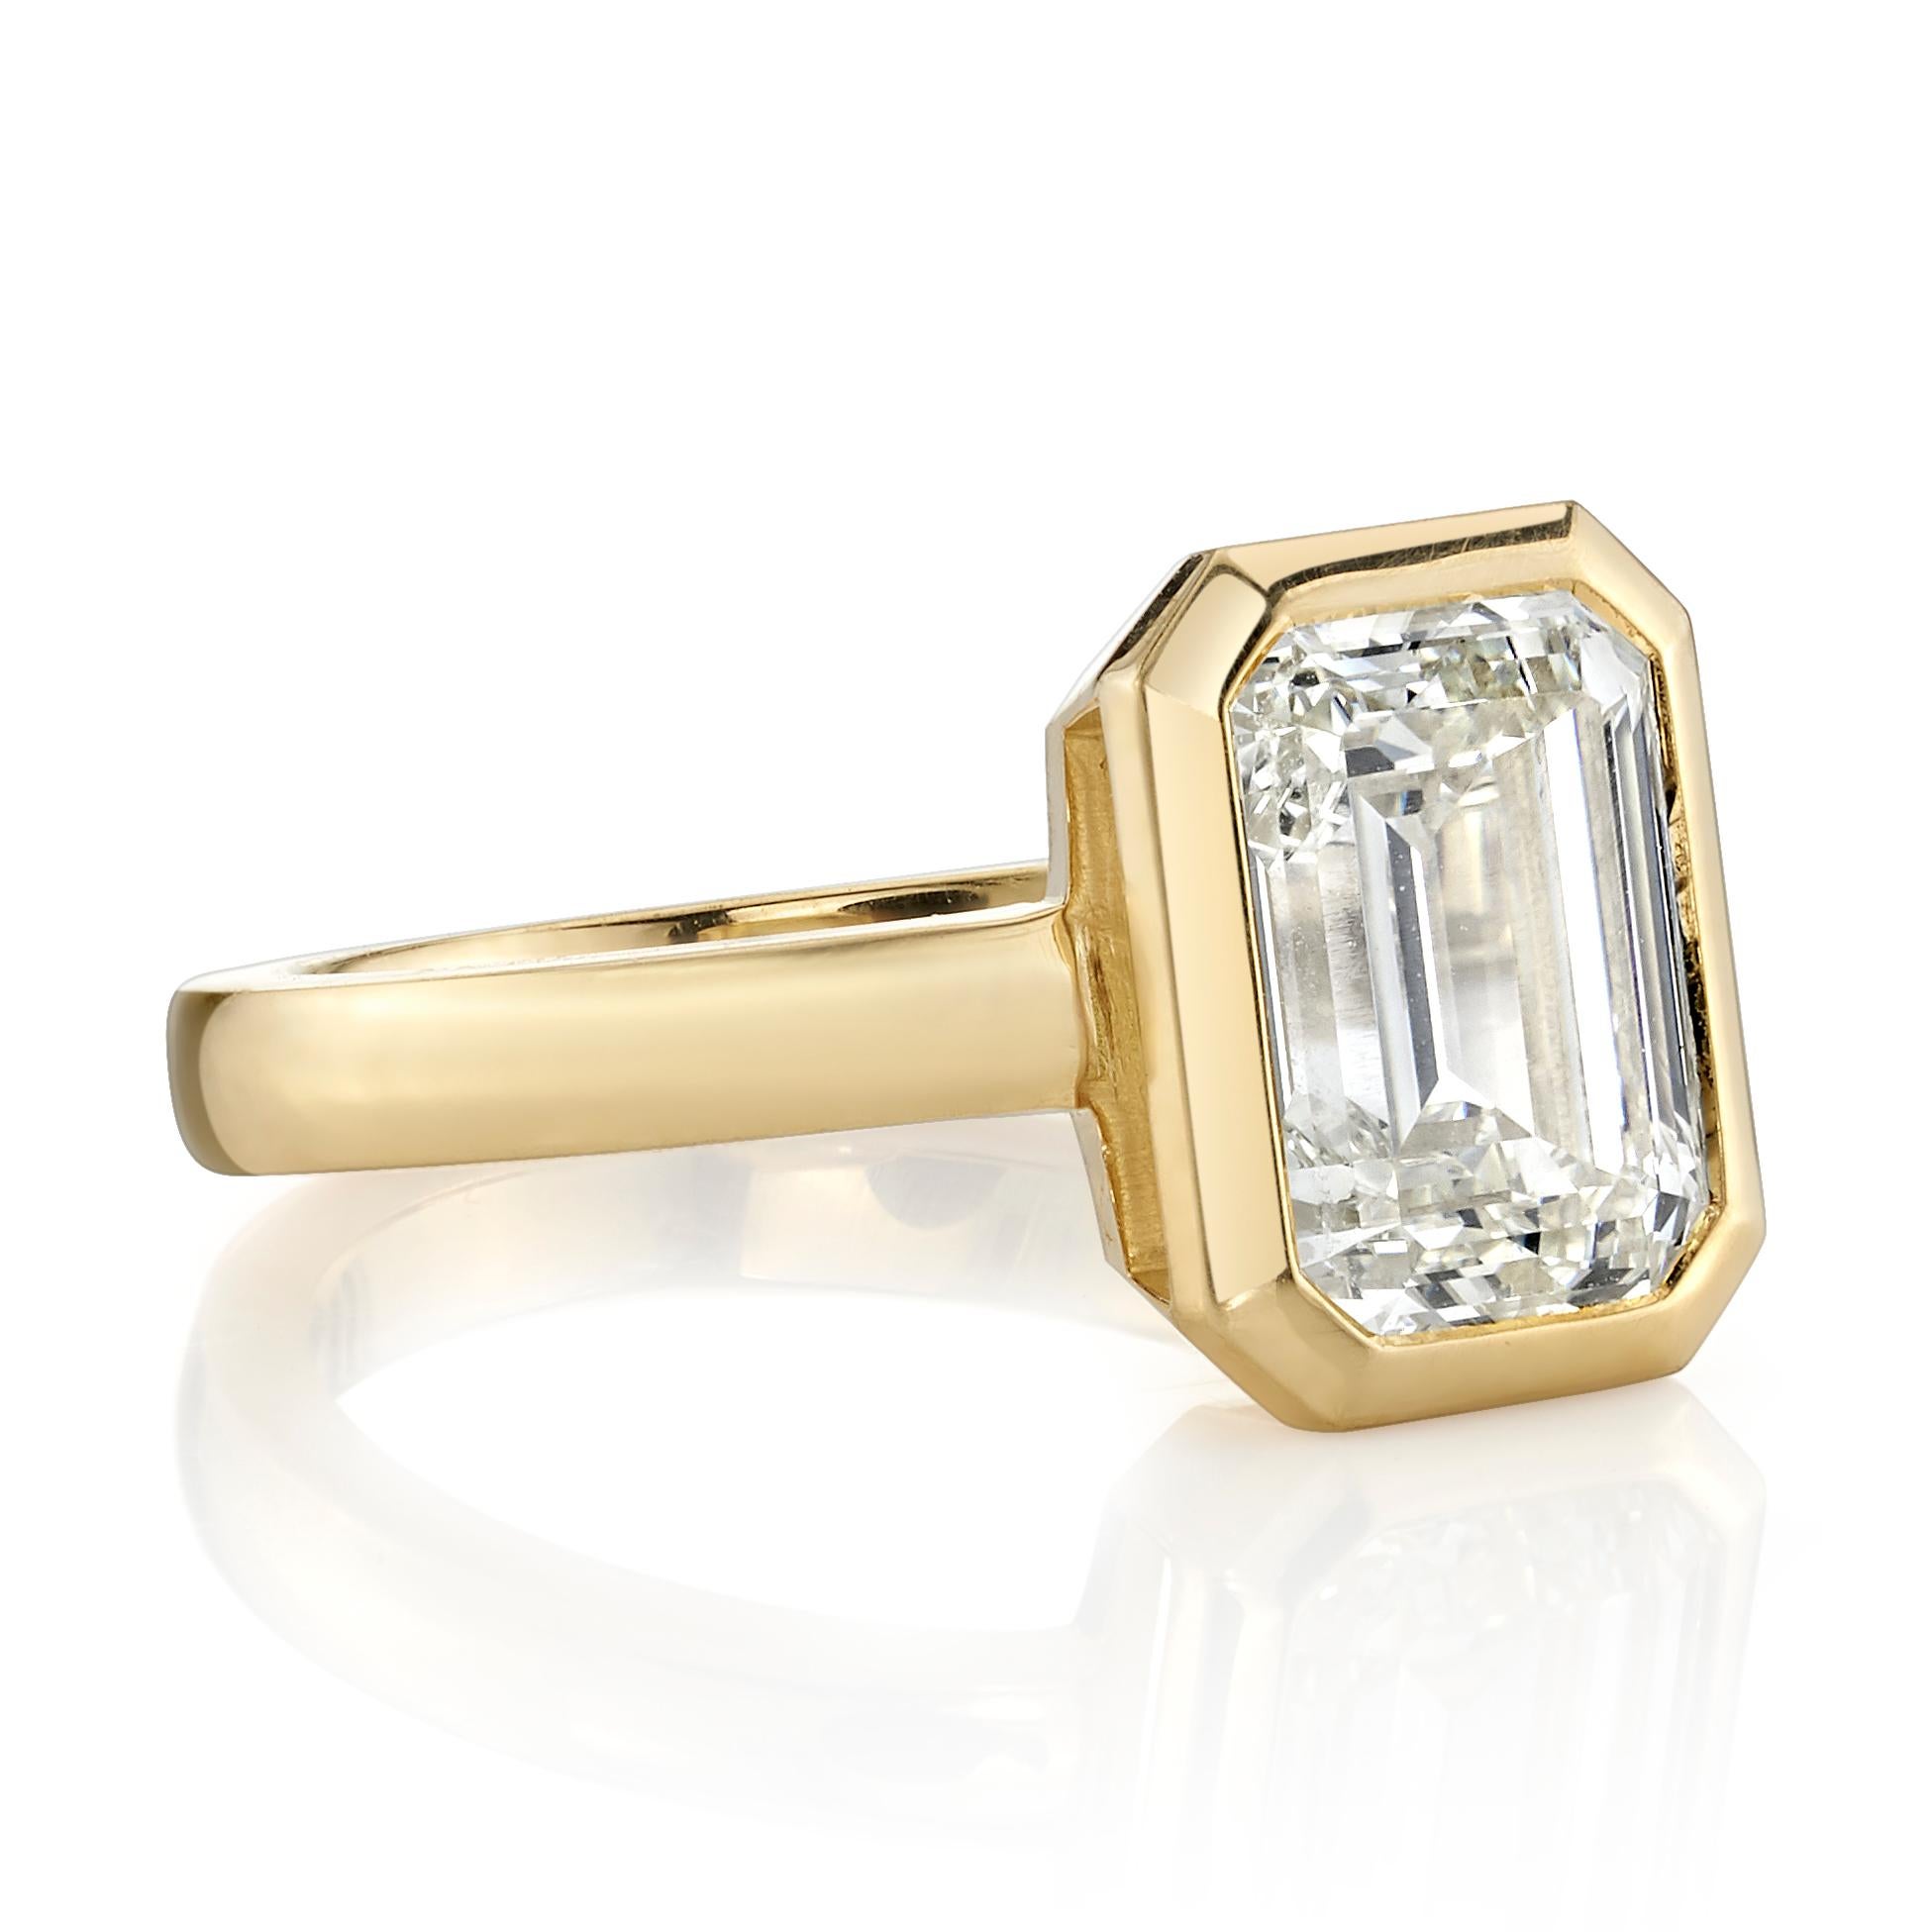 3.01ct N/VS1 GIA certified Emerald cut diamond set in a handcrafted 18K yellow gold mounting. Ring is currently a size 6 and can be sized to fi